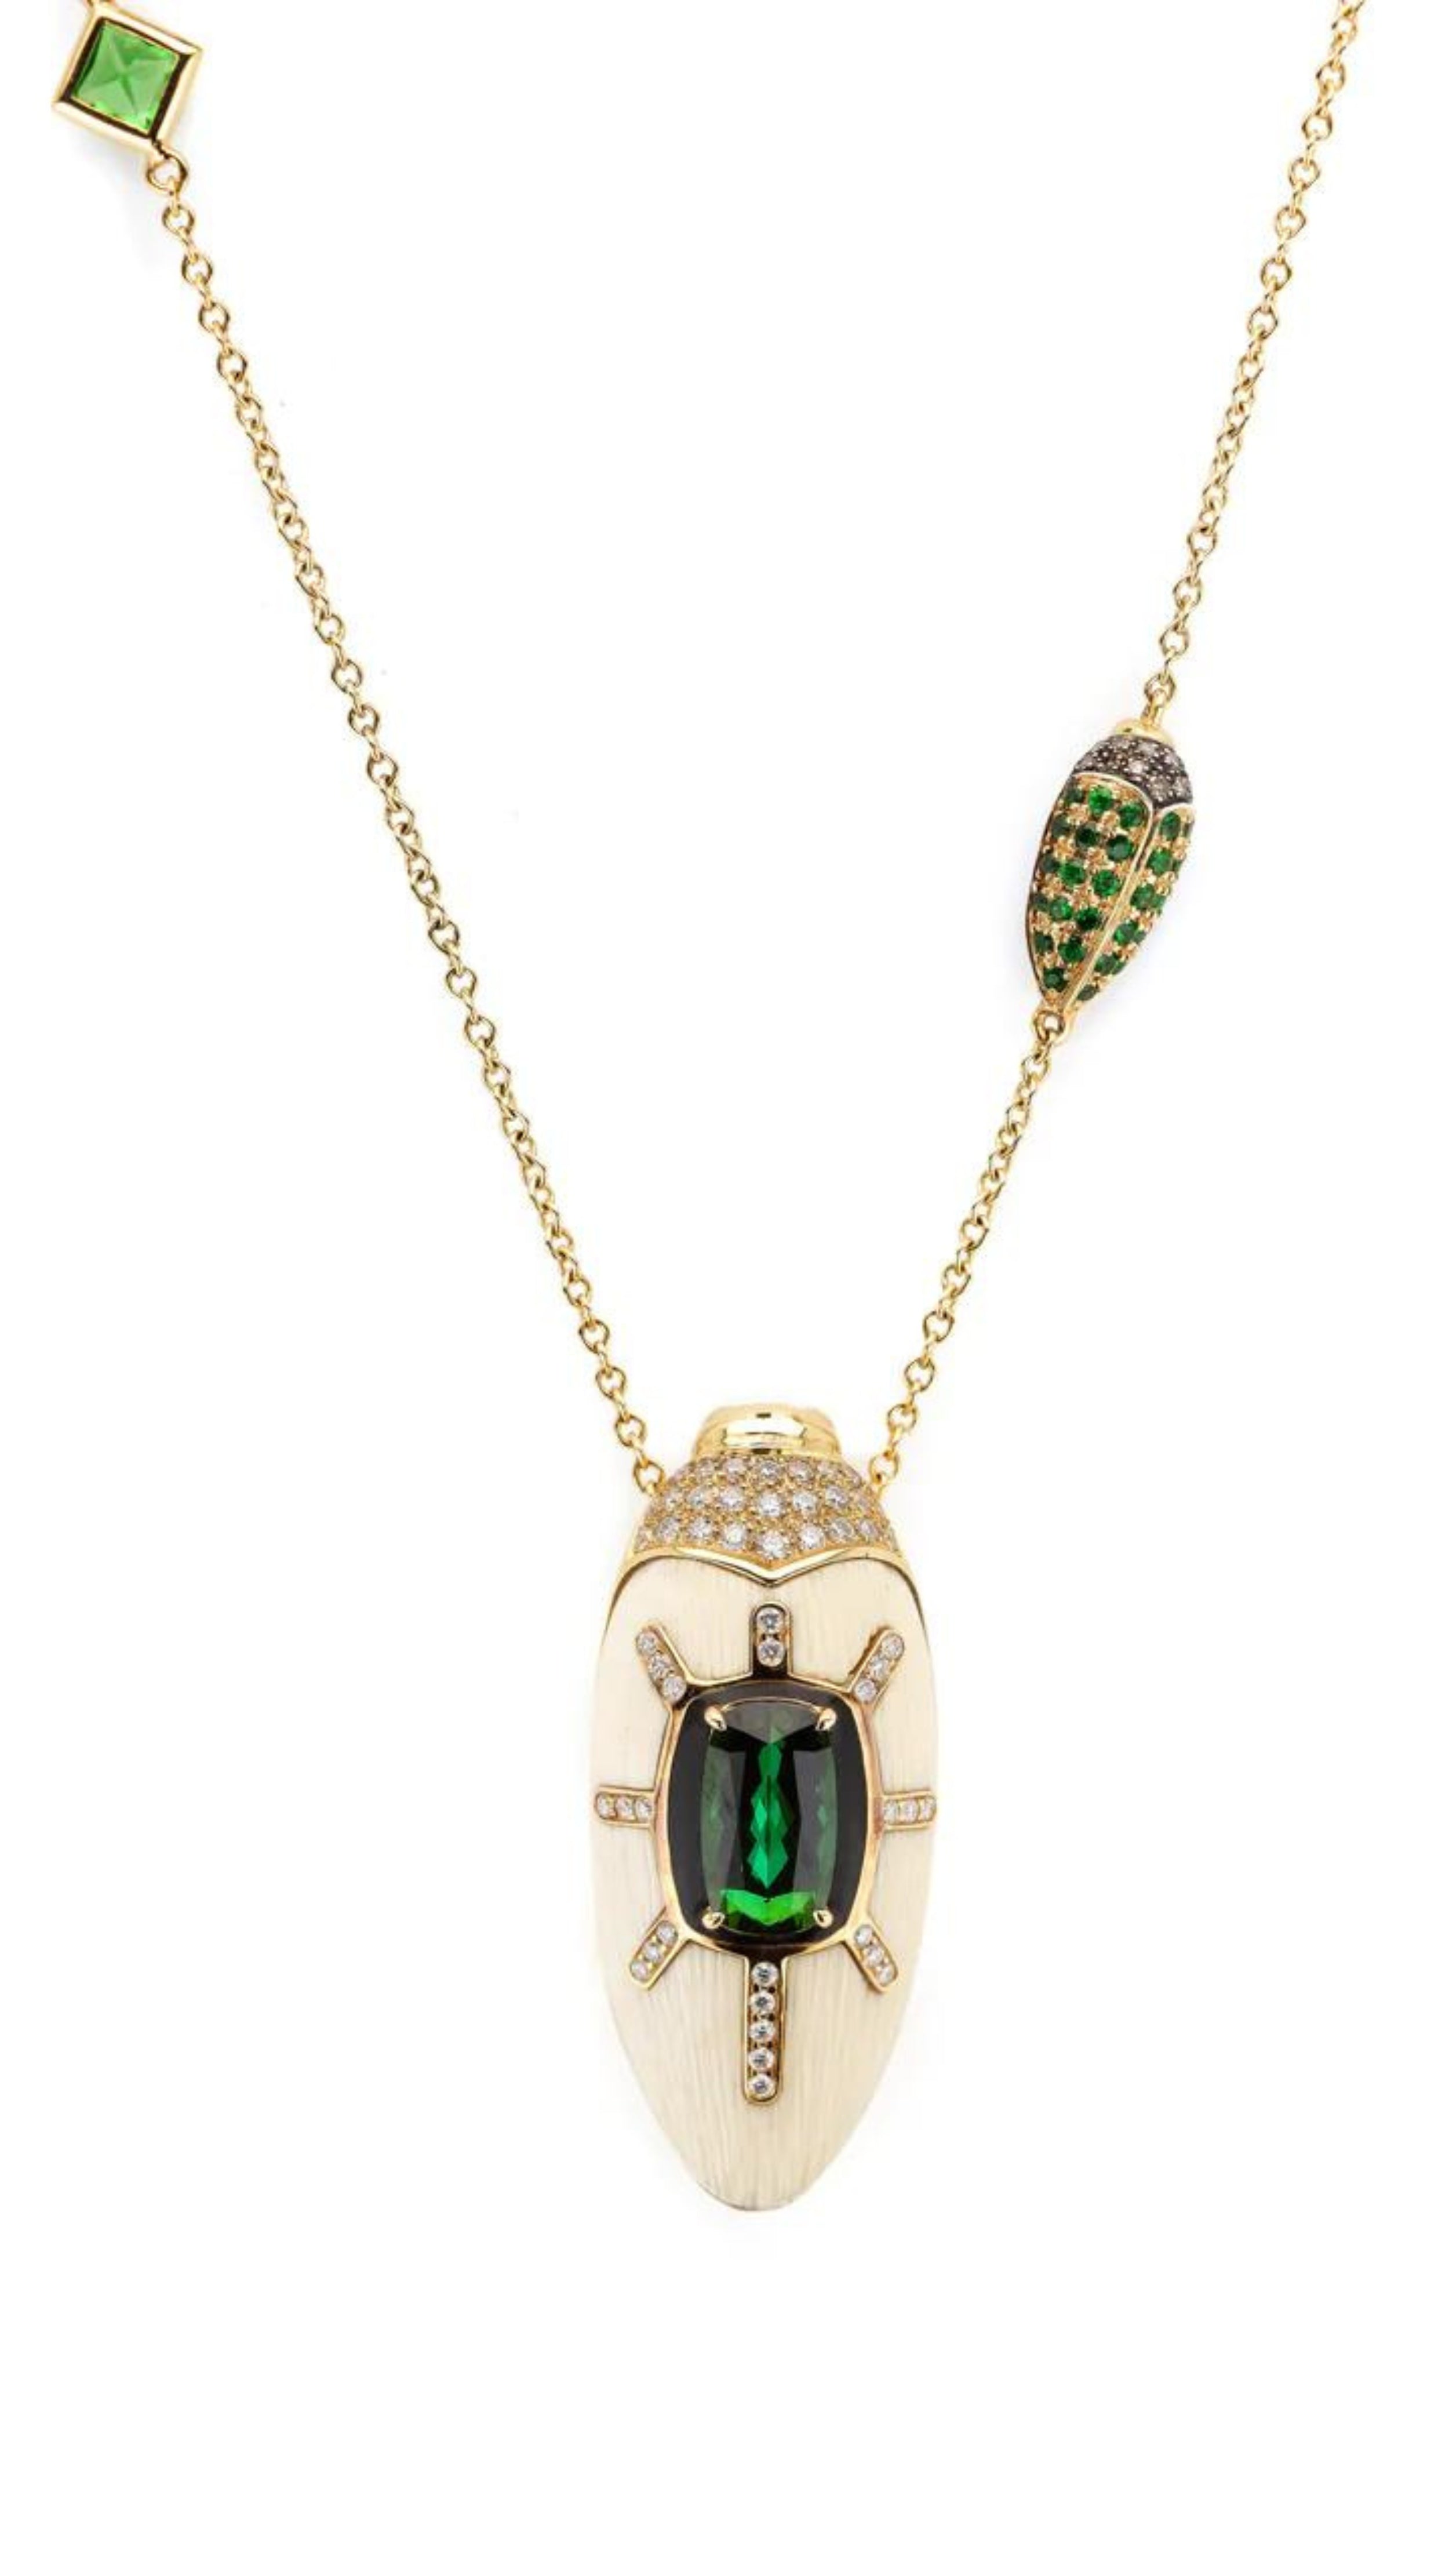 Bibi van der Velden Scarab Mammoth Necklace. Art deco style scarab pendant drop crafted from mammoth tusk and set with green tsavorite stones and pave white and brown diamonds. With links in the chain of scarabs and inset stones. Adjustable length necklace. Sustainable high jewelry. Photo showing a close up on the scarab pendent.